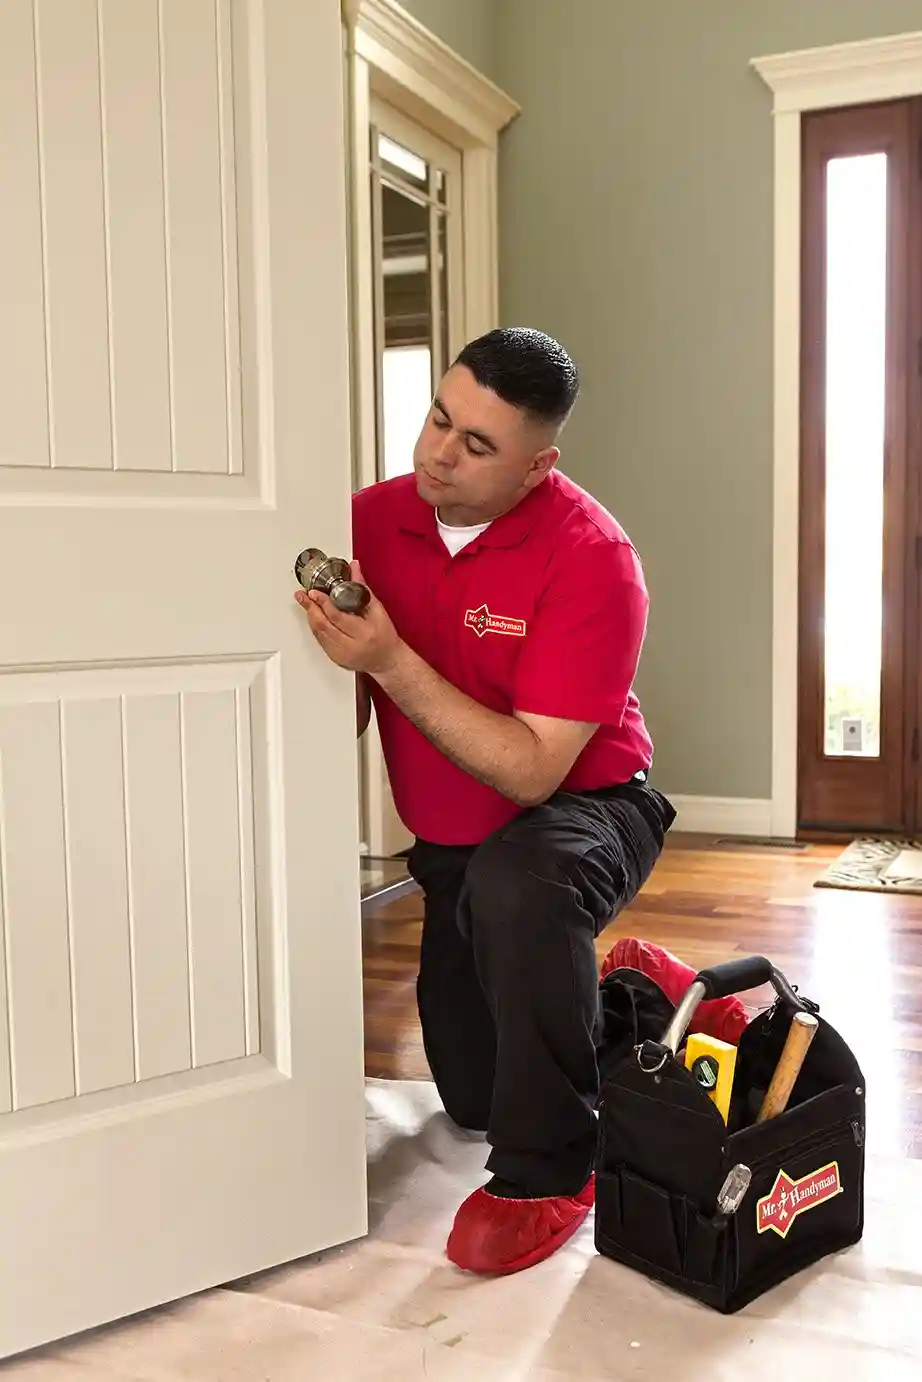 A handyman from Mr. Handyman installing a new doorknob on a bedroom door during an appointment for door repair in Vancouver, WA.